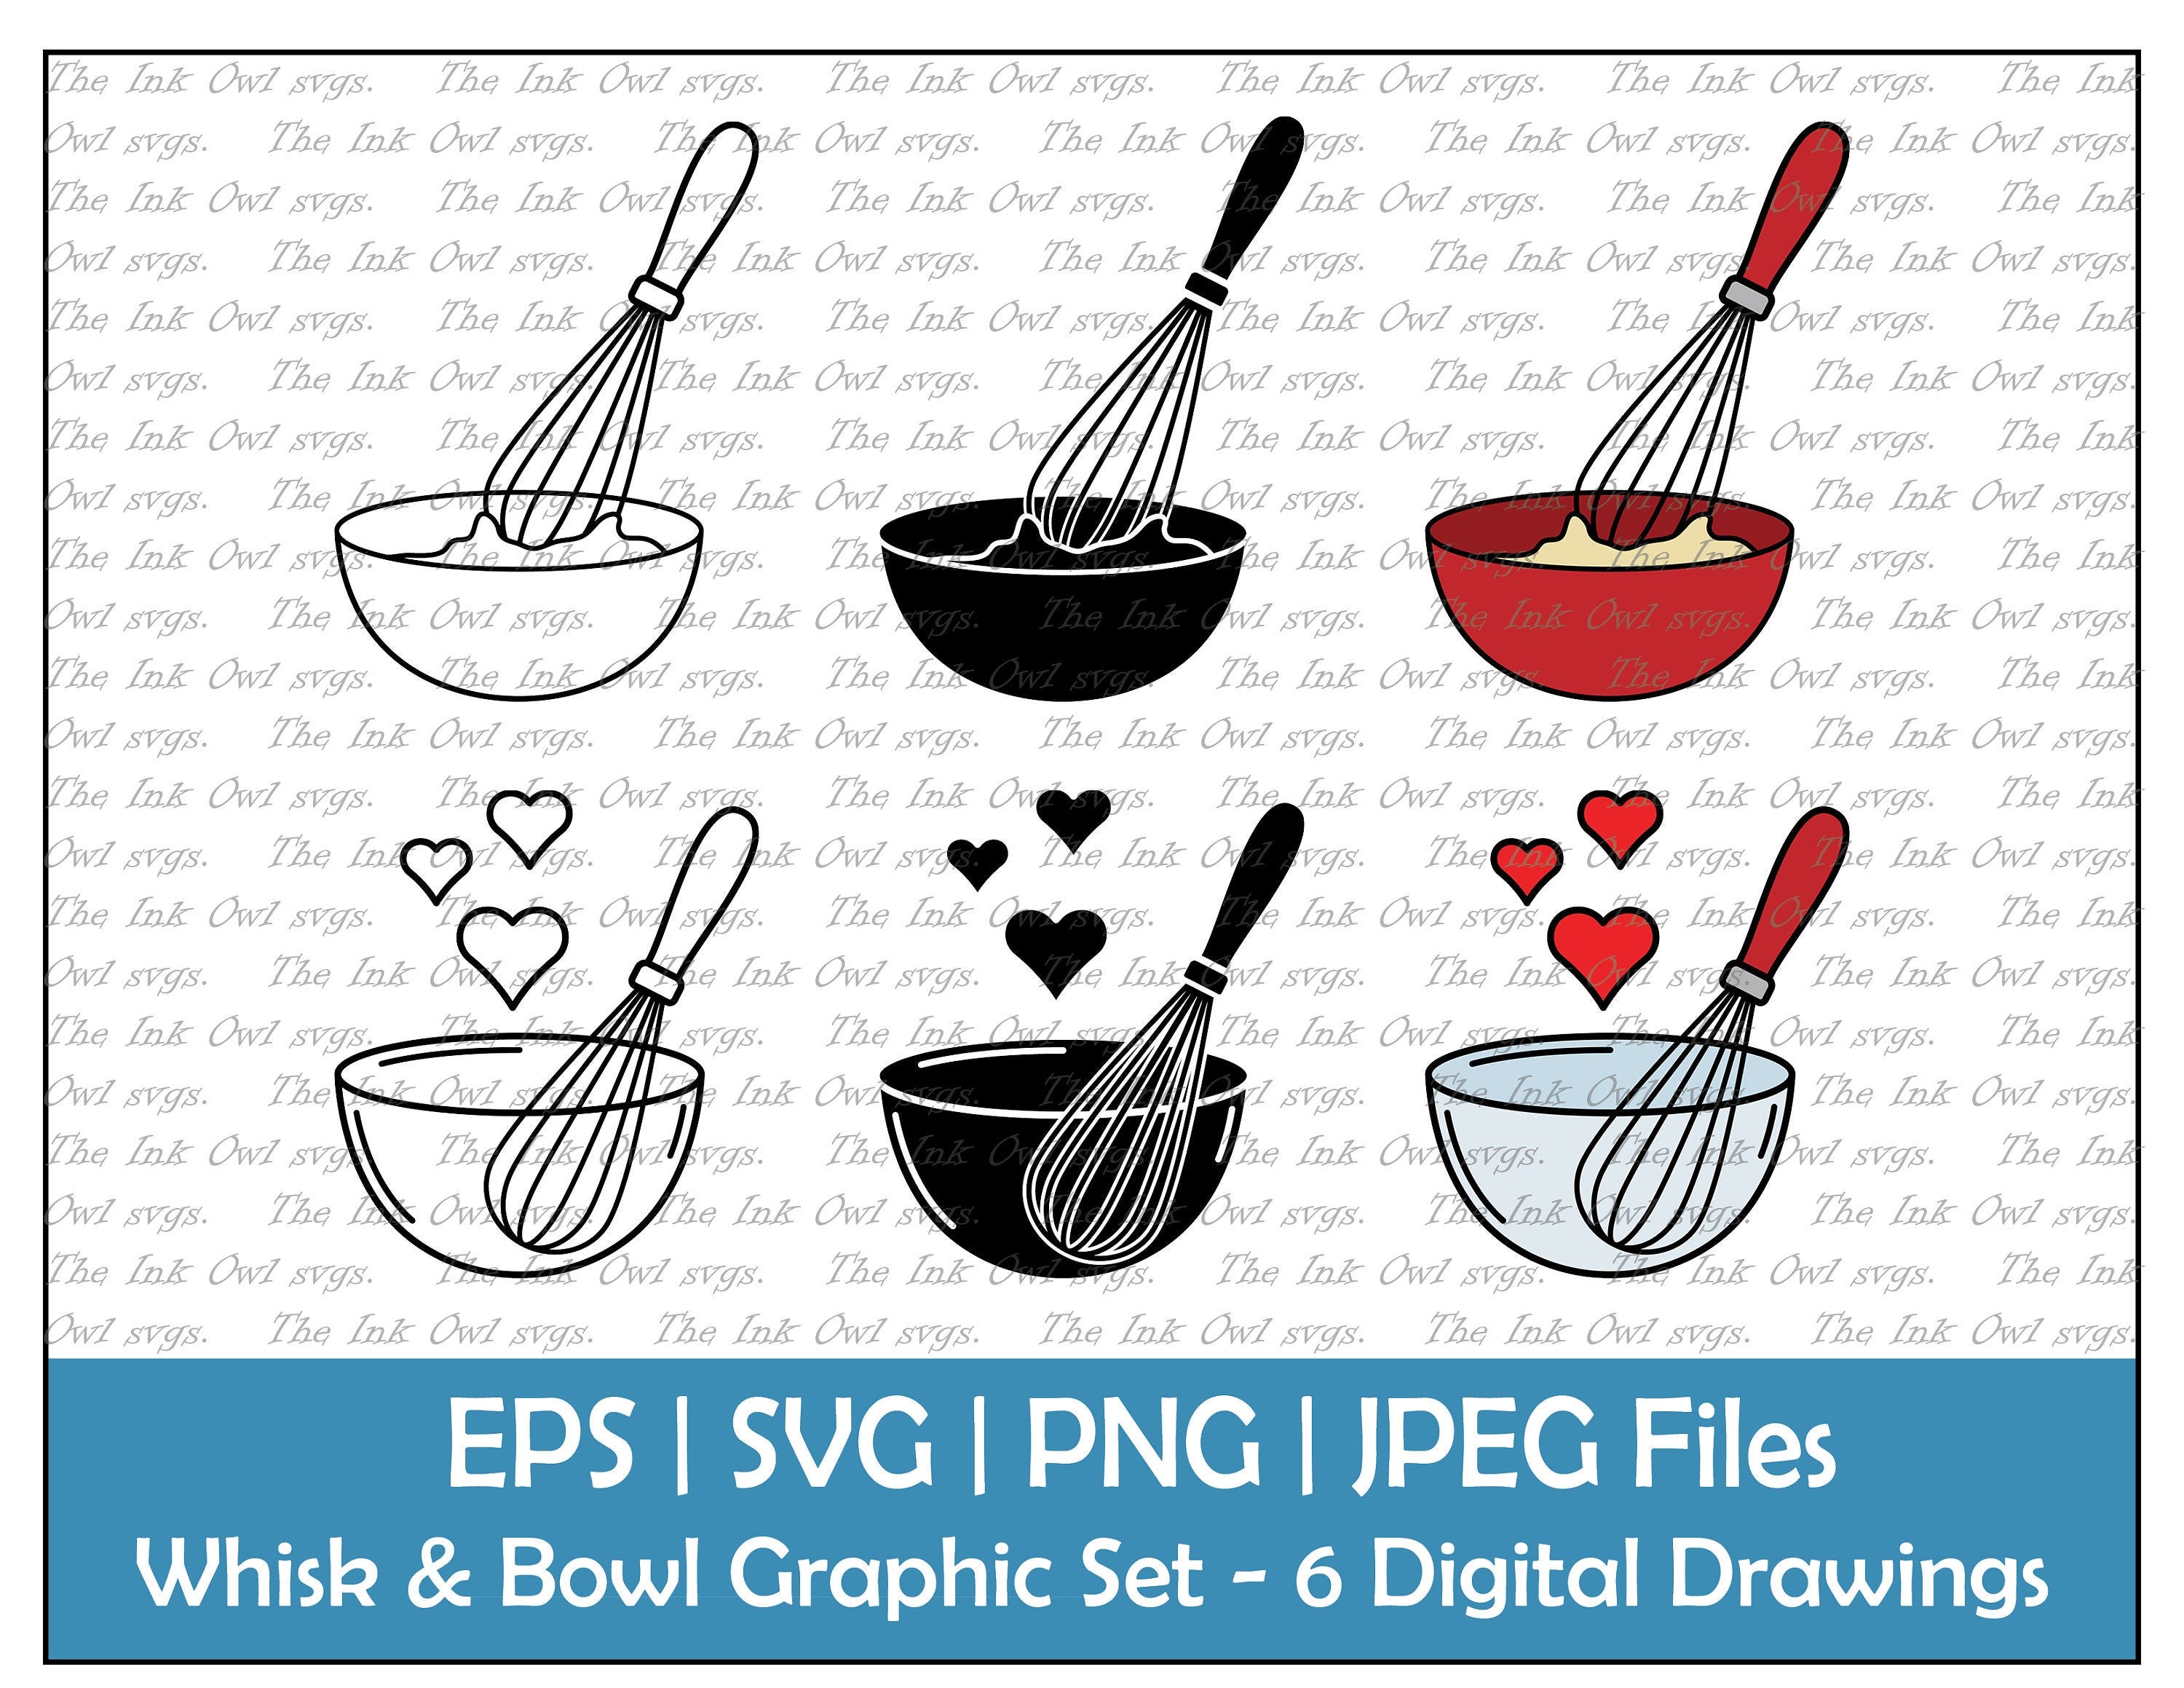 Whisk and Mixing Bowl Vector Clipart / Outline & Stamp Graphic/ Baking cooking Icon / PNG, JPG, SVG, Eps